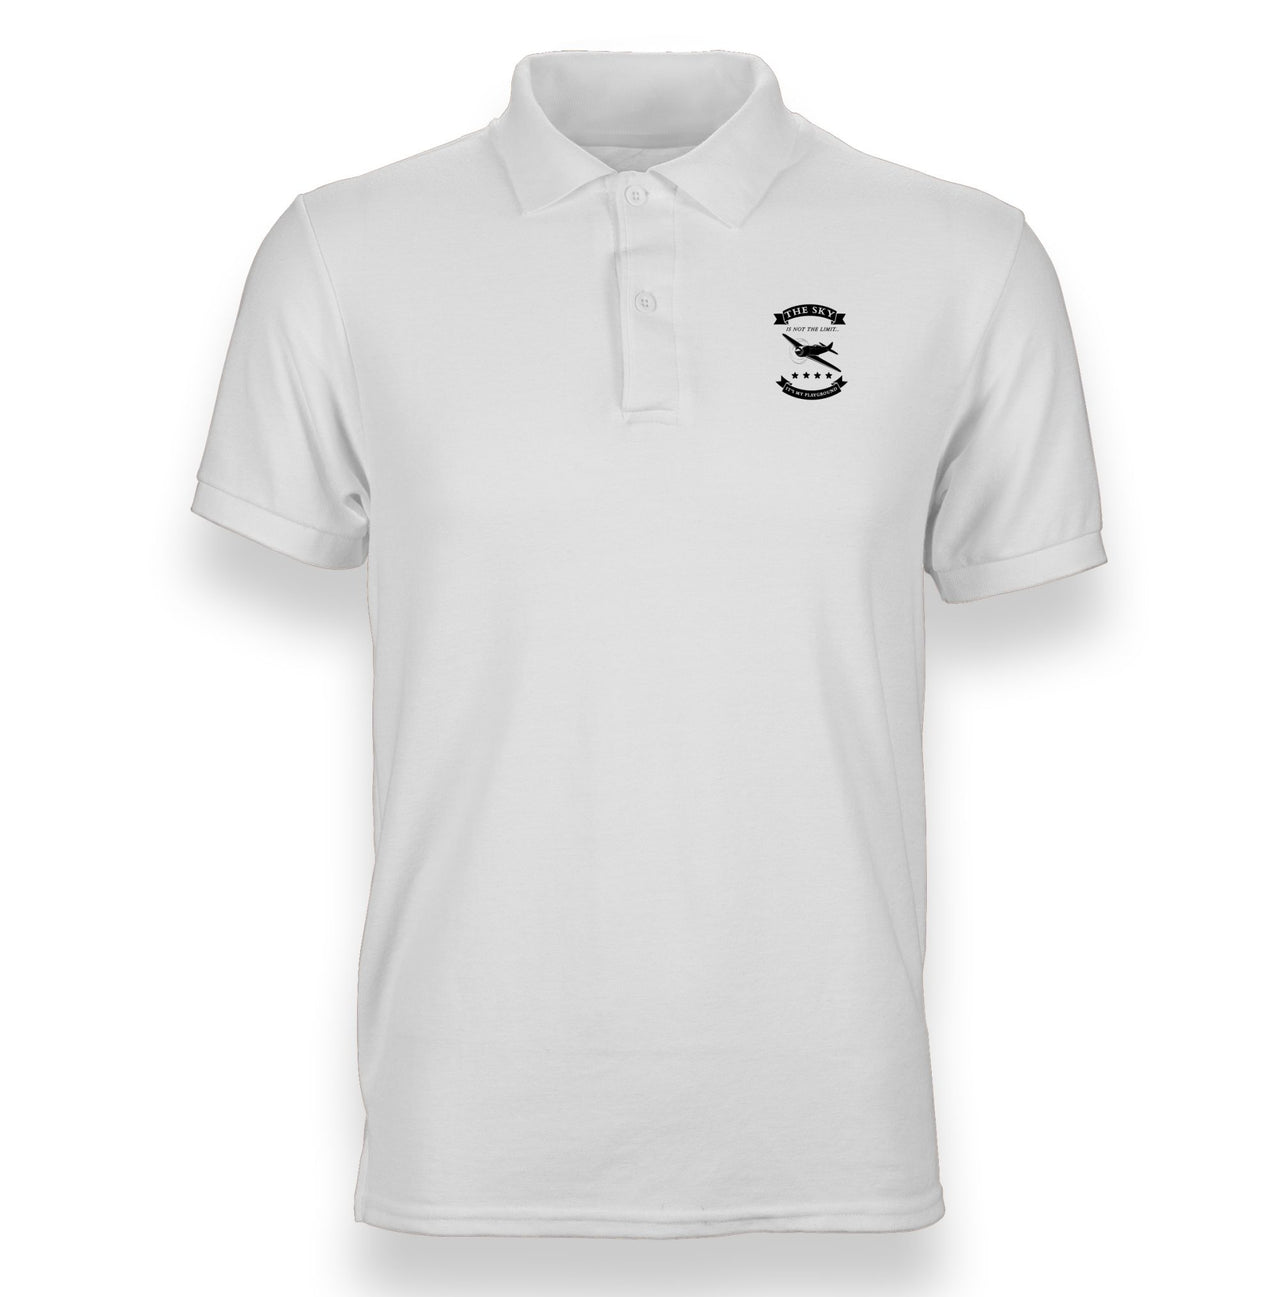 The Sky is not the limit, It's my playground Designed "WOMEN" Polo T-Shirts